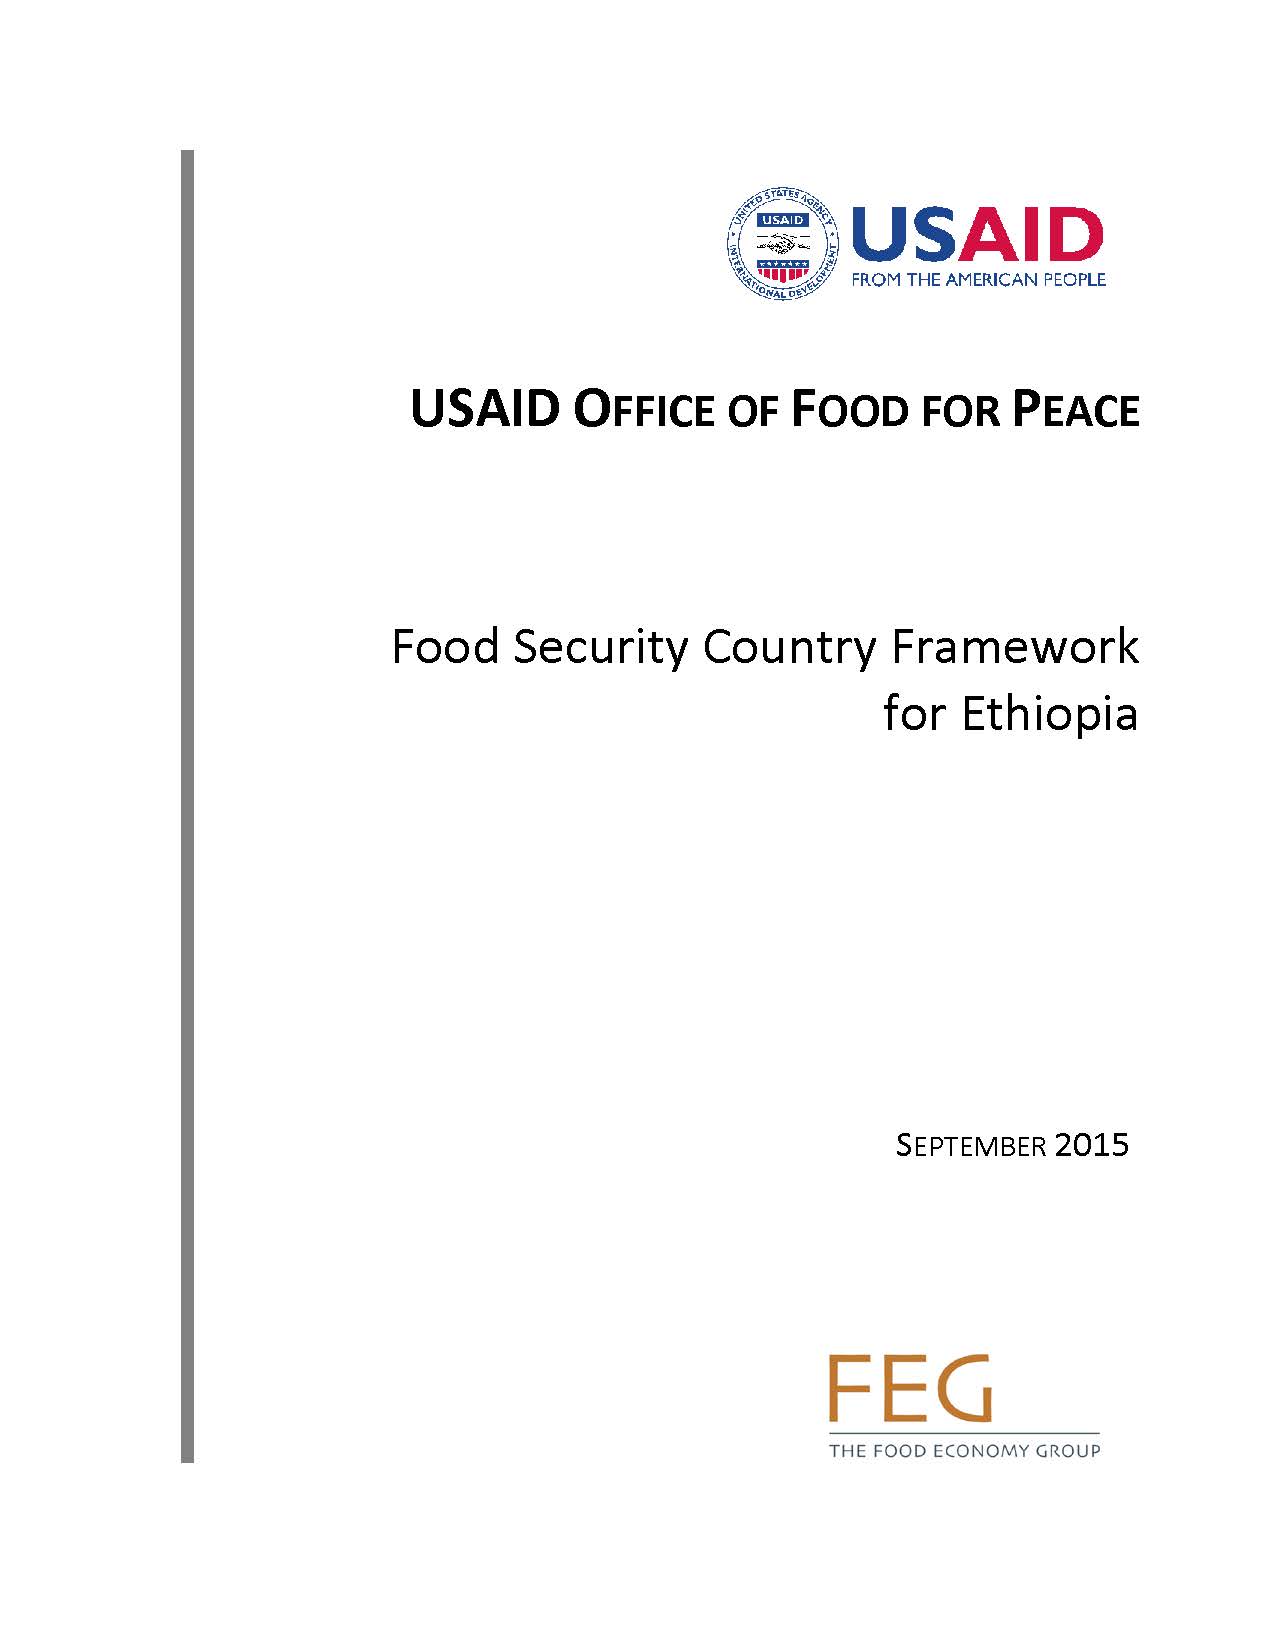 Food Security Country Framework for Ethiopia